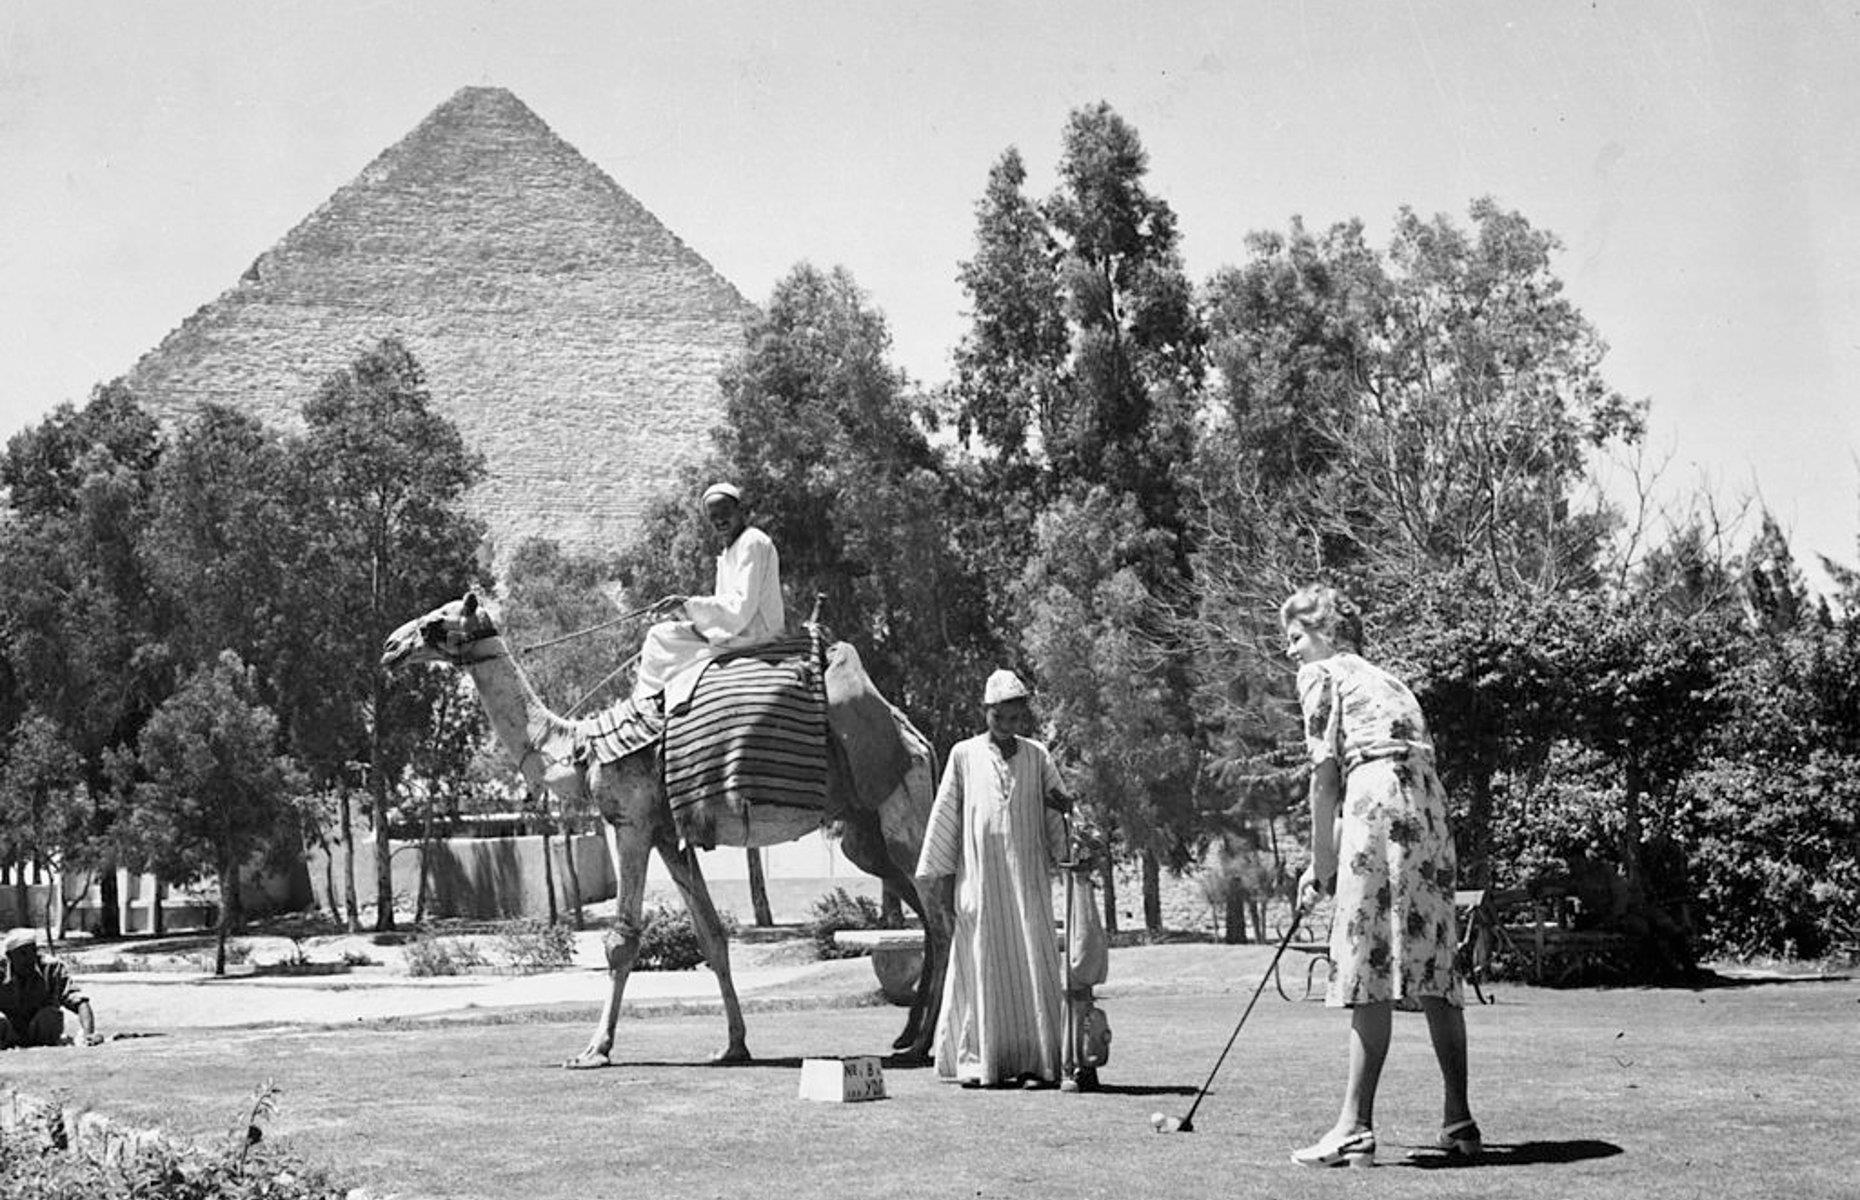 <p>By the late-19th century, tourism began in a small way when travel company Thomas Cook started offering trips for wealthy and well-educated Westerners. It became part of the Grand Tour for the young, rich, leisured classes but still remained quiet. The discovery of the treasures in Tutankhamun’s tomb in 1922 astonished the world and revived interest in ancient Egypt in general. Now, a trip to the Great Pyramids is a big-ticket bucket-list item. </p>  <p><a href="https://www.loveexploring.com/gallerylist/90108/the-bent-pyramid-and-other-ancient-egyptian-mysteries"><strong>Love this? Check out the Bent Pyramid and other ancient Egyptian mysteries</strong></a></p>